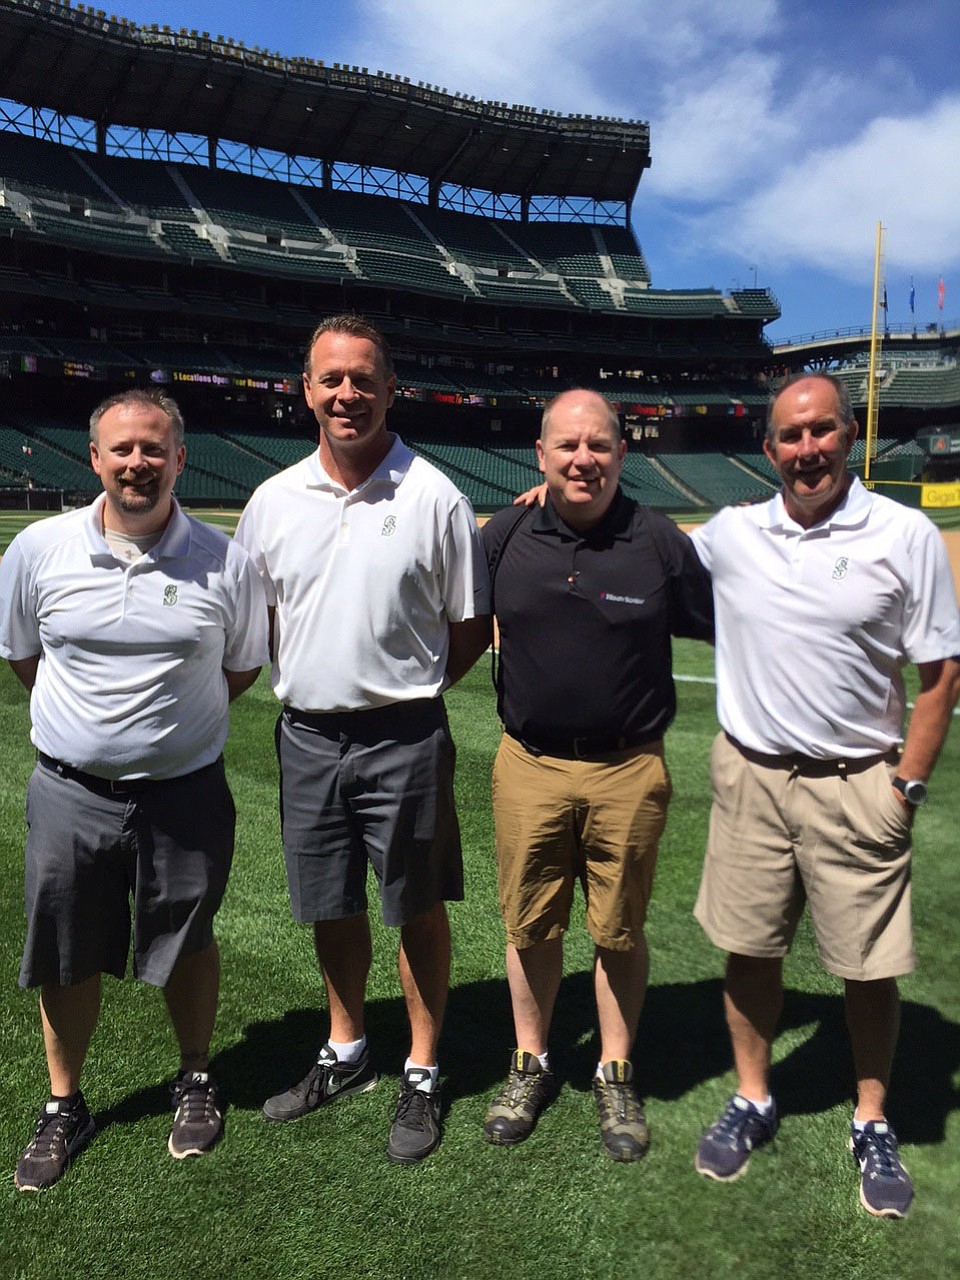 East Vancouver: Brian Apling, black shirt, joined trainers from the Seattle Mariners at Safeco Field on July 28 to talk to children as part of Professional Baseball Athletic Trainers Society's PLAY Campaign.